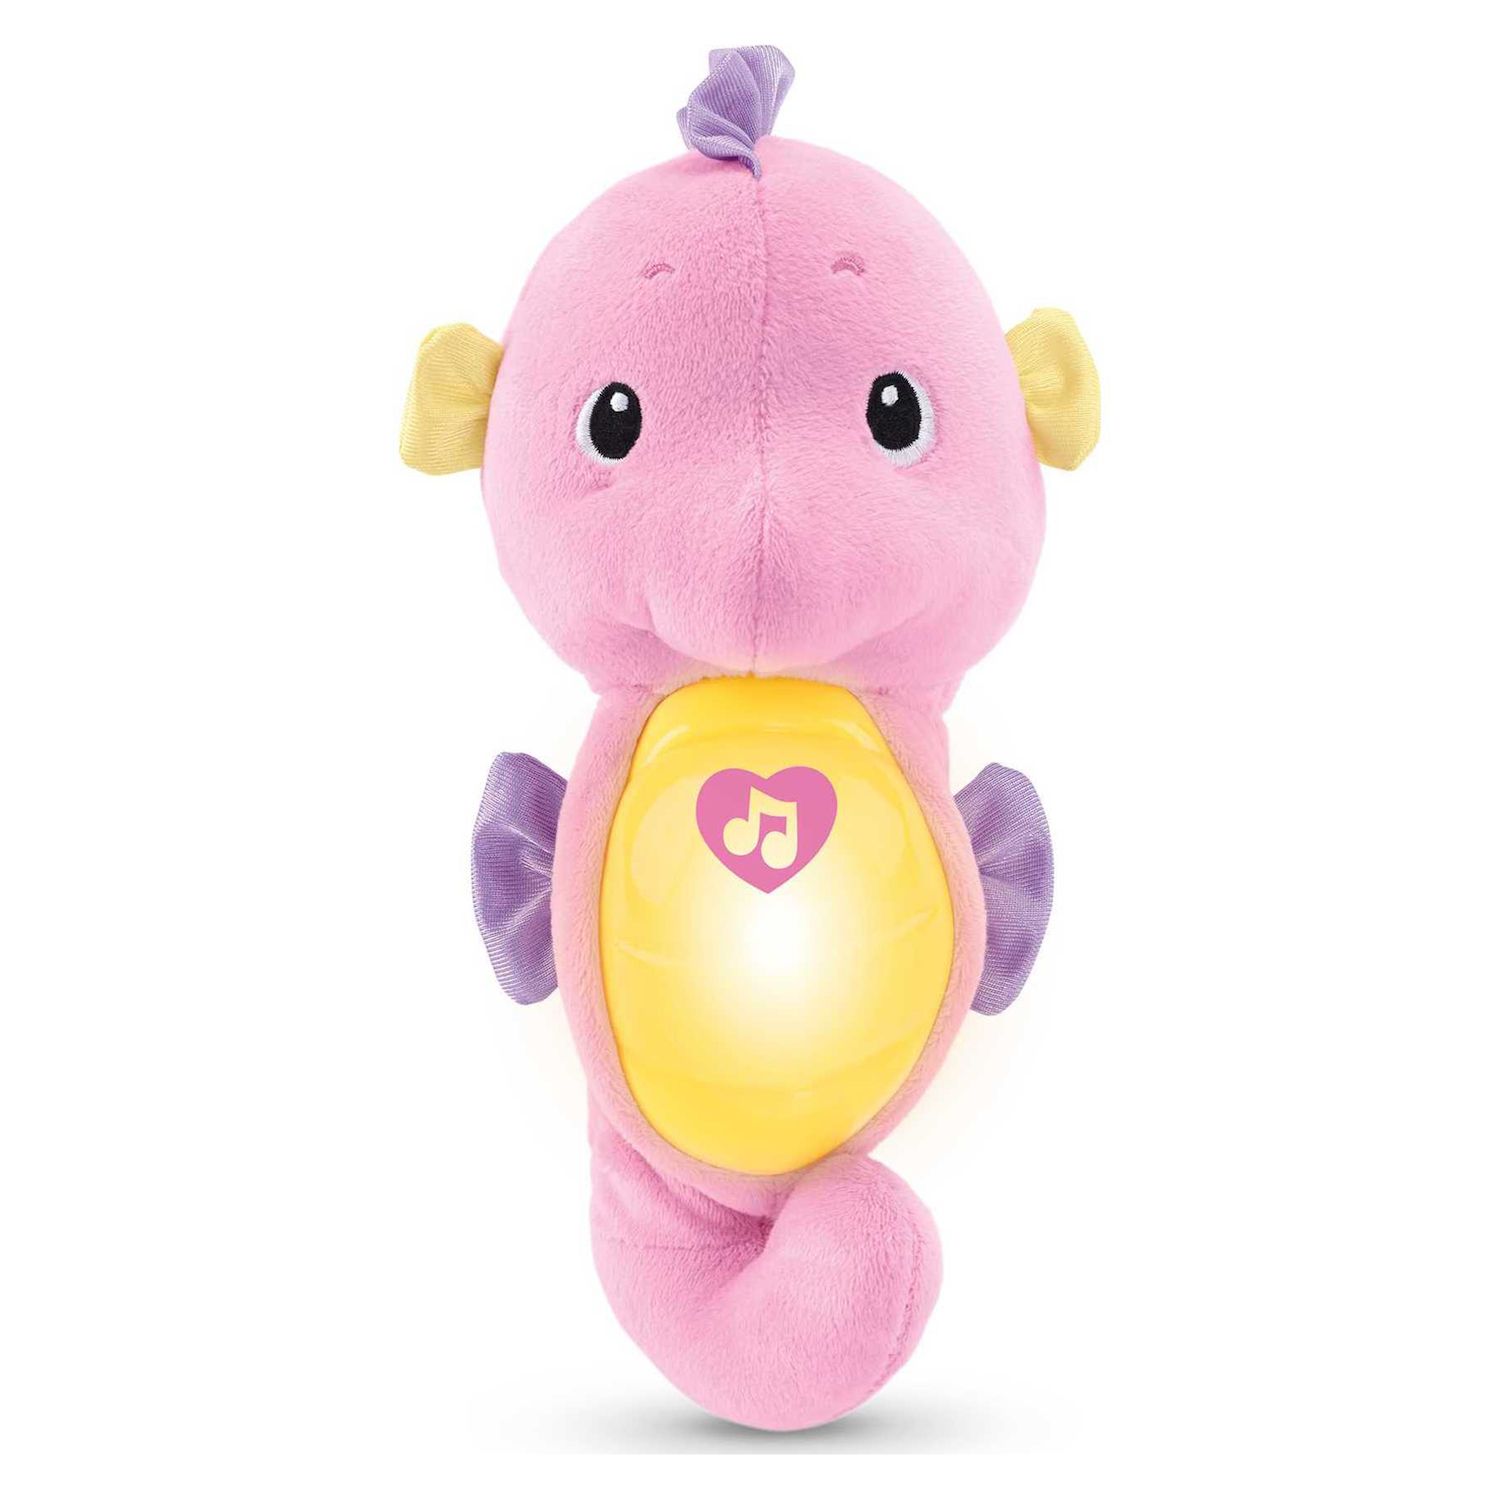 fisher price soothe and glow